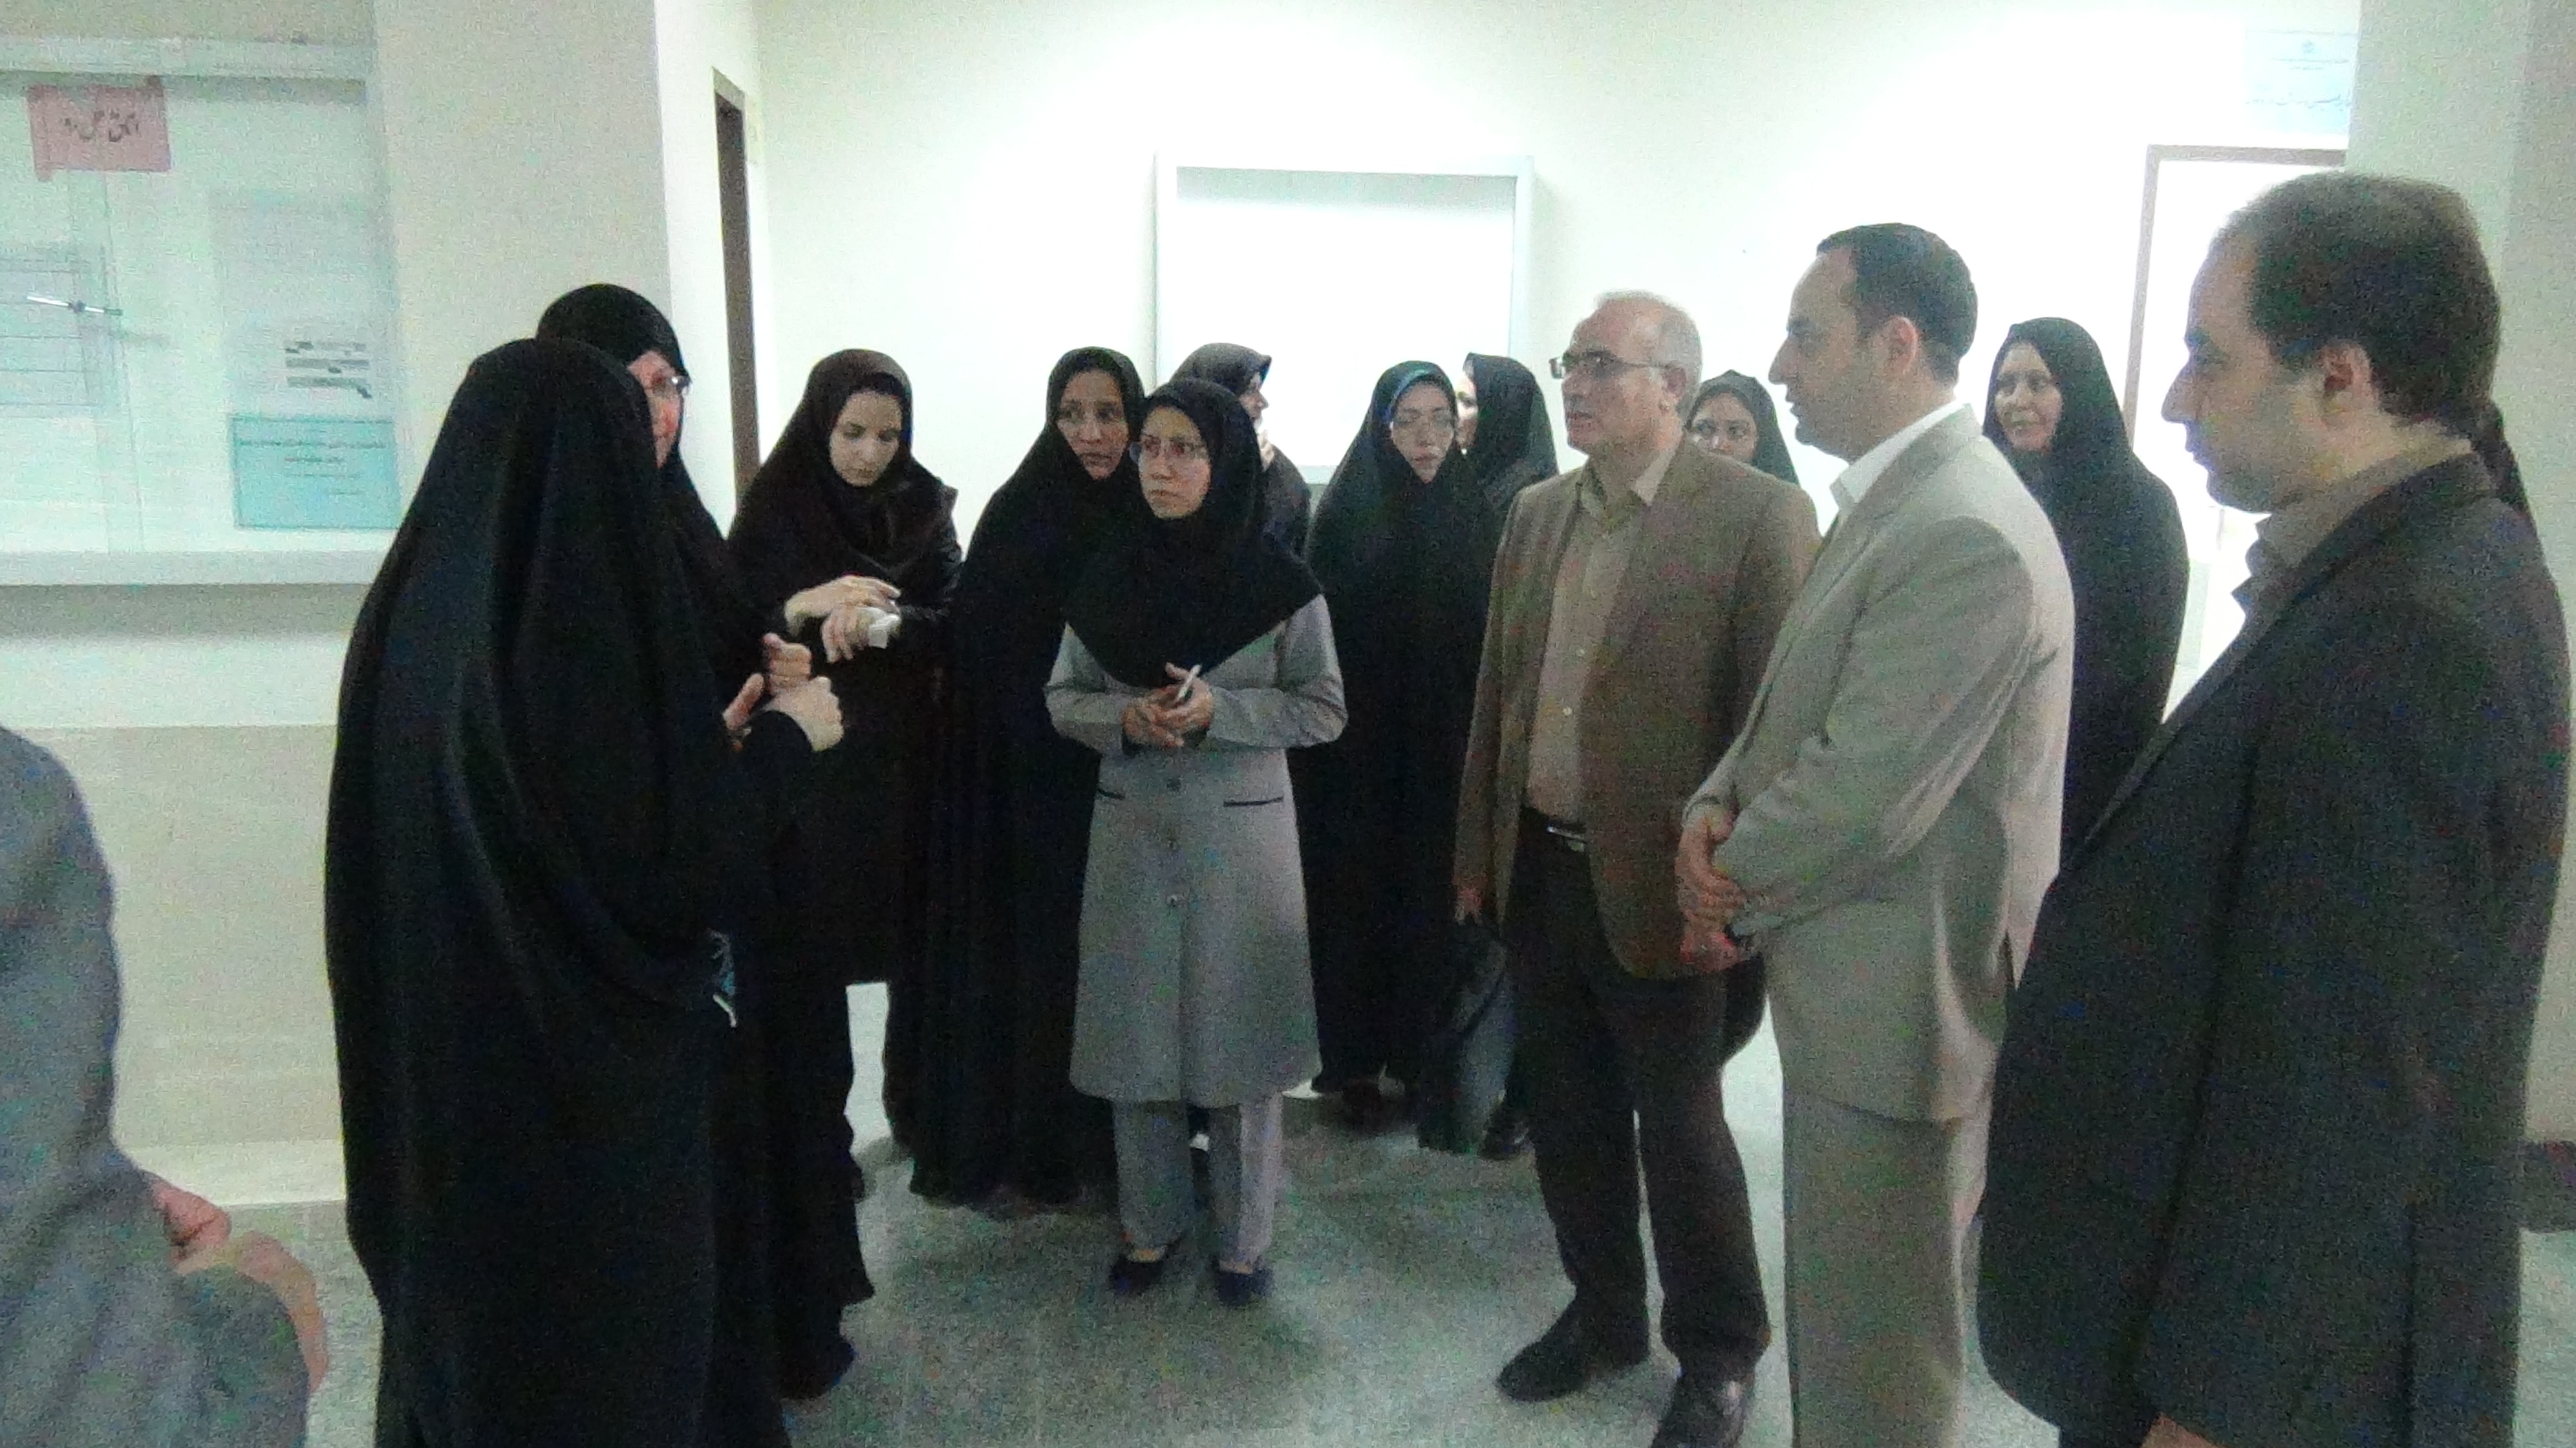 Board staff of the department of midwifery visited school of nursing and midwifery